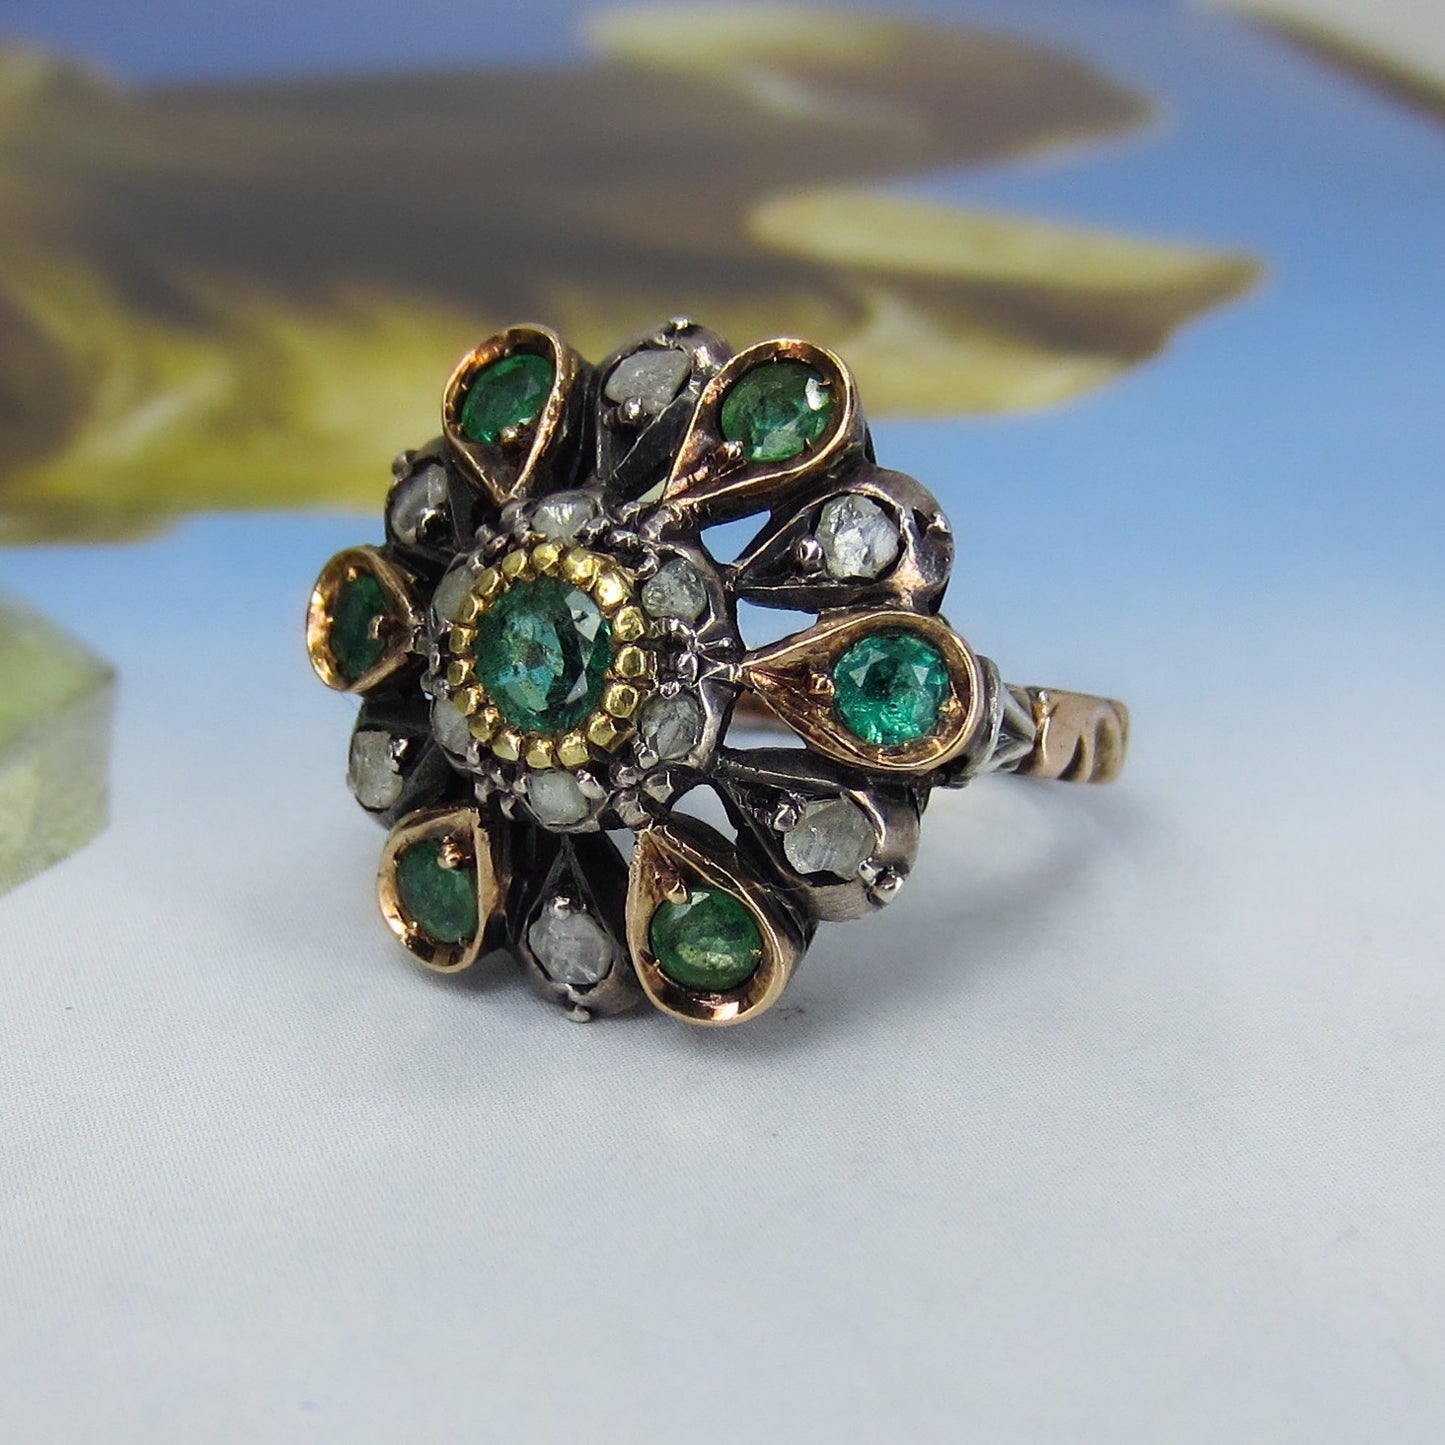 Mid-Century Renaissance Revival Emerald and Diamond Cluster Ring Silver/14k c. 1940